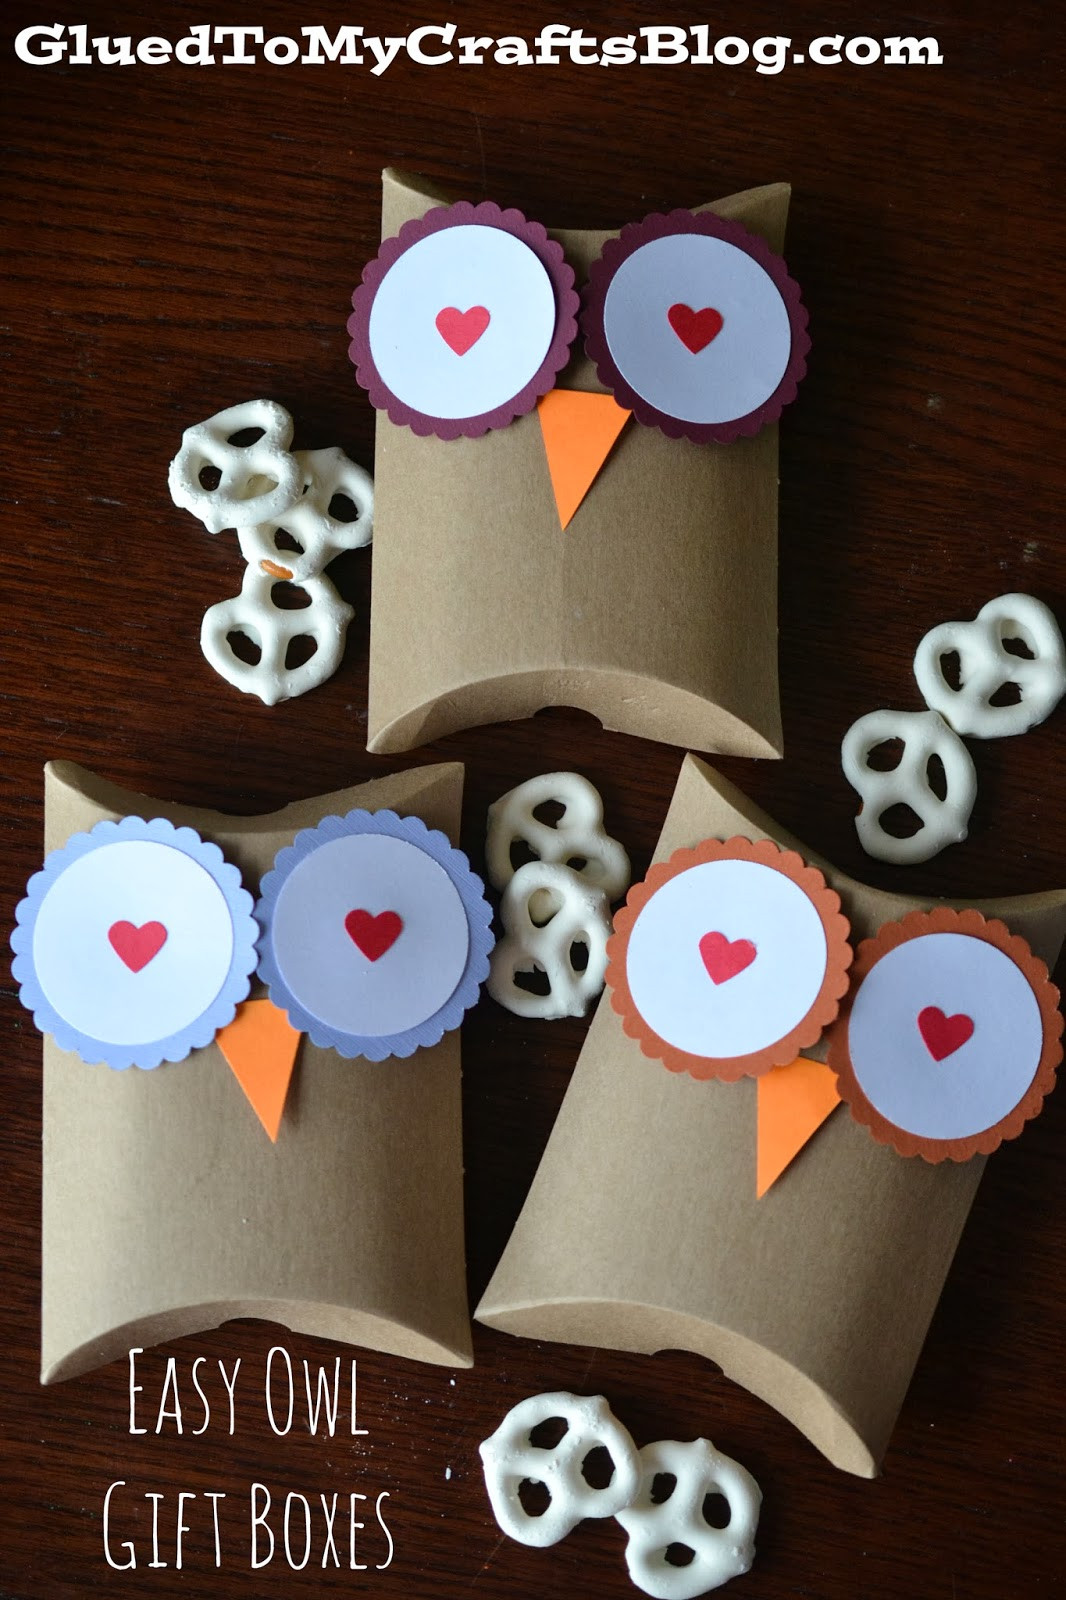 Easy Craft Gifts
 Easy Owl Gift Boxes Craft Glued To My Crafts